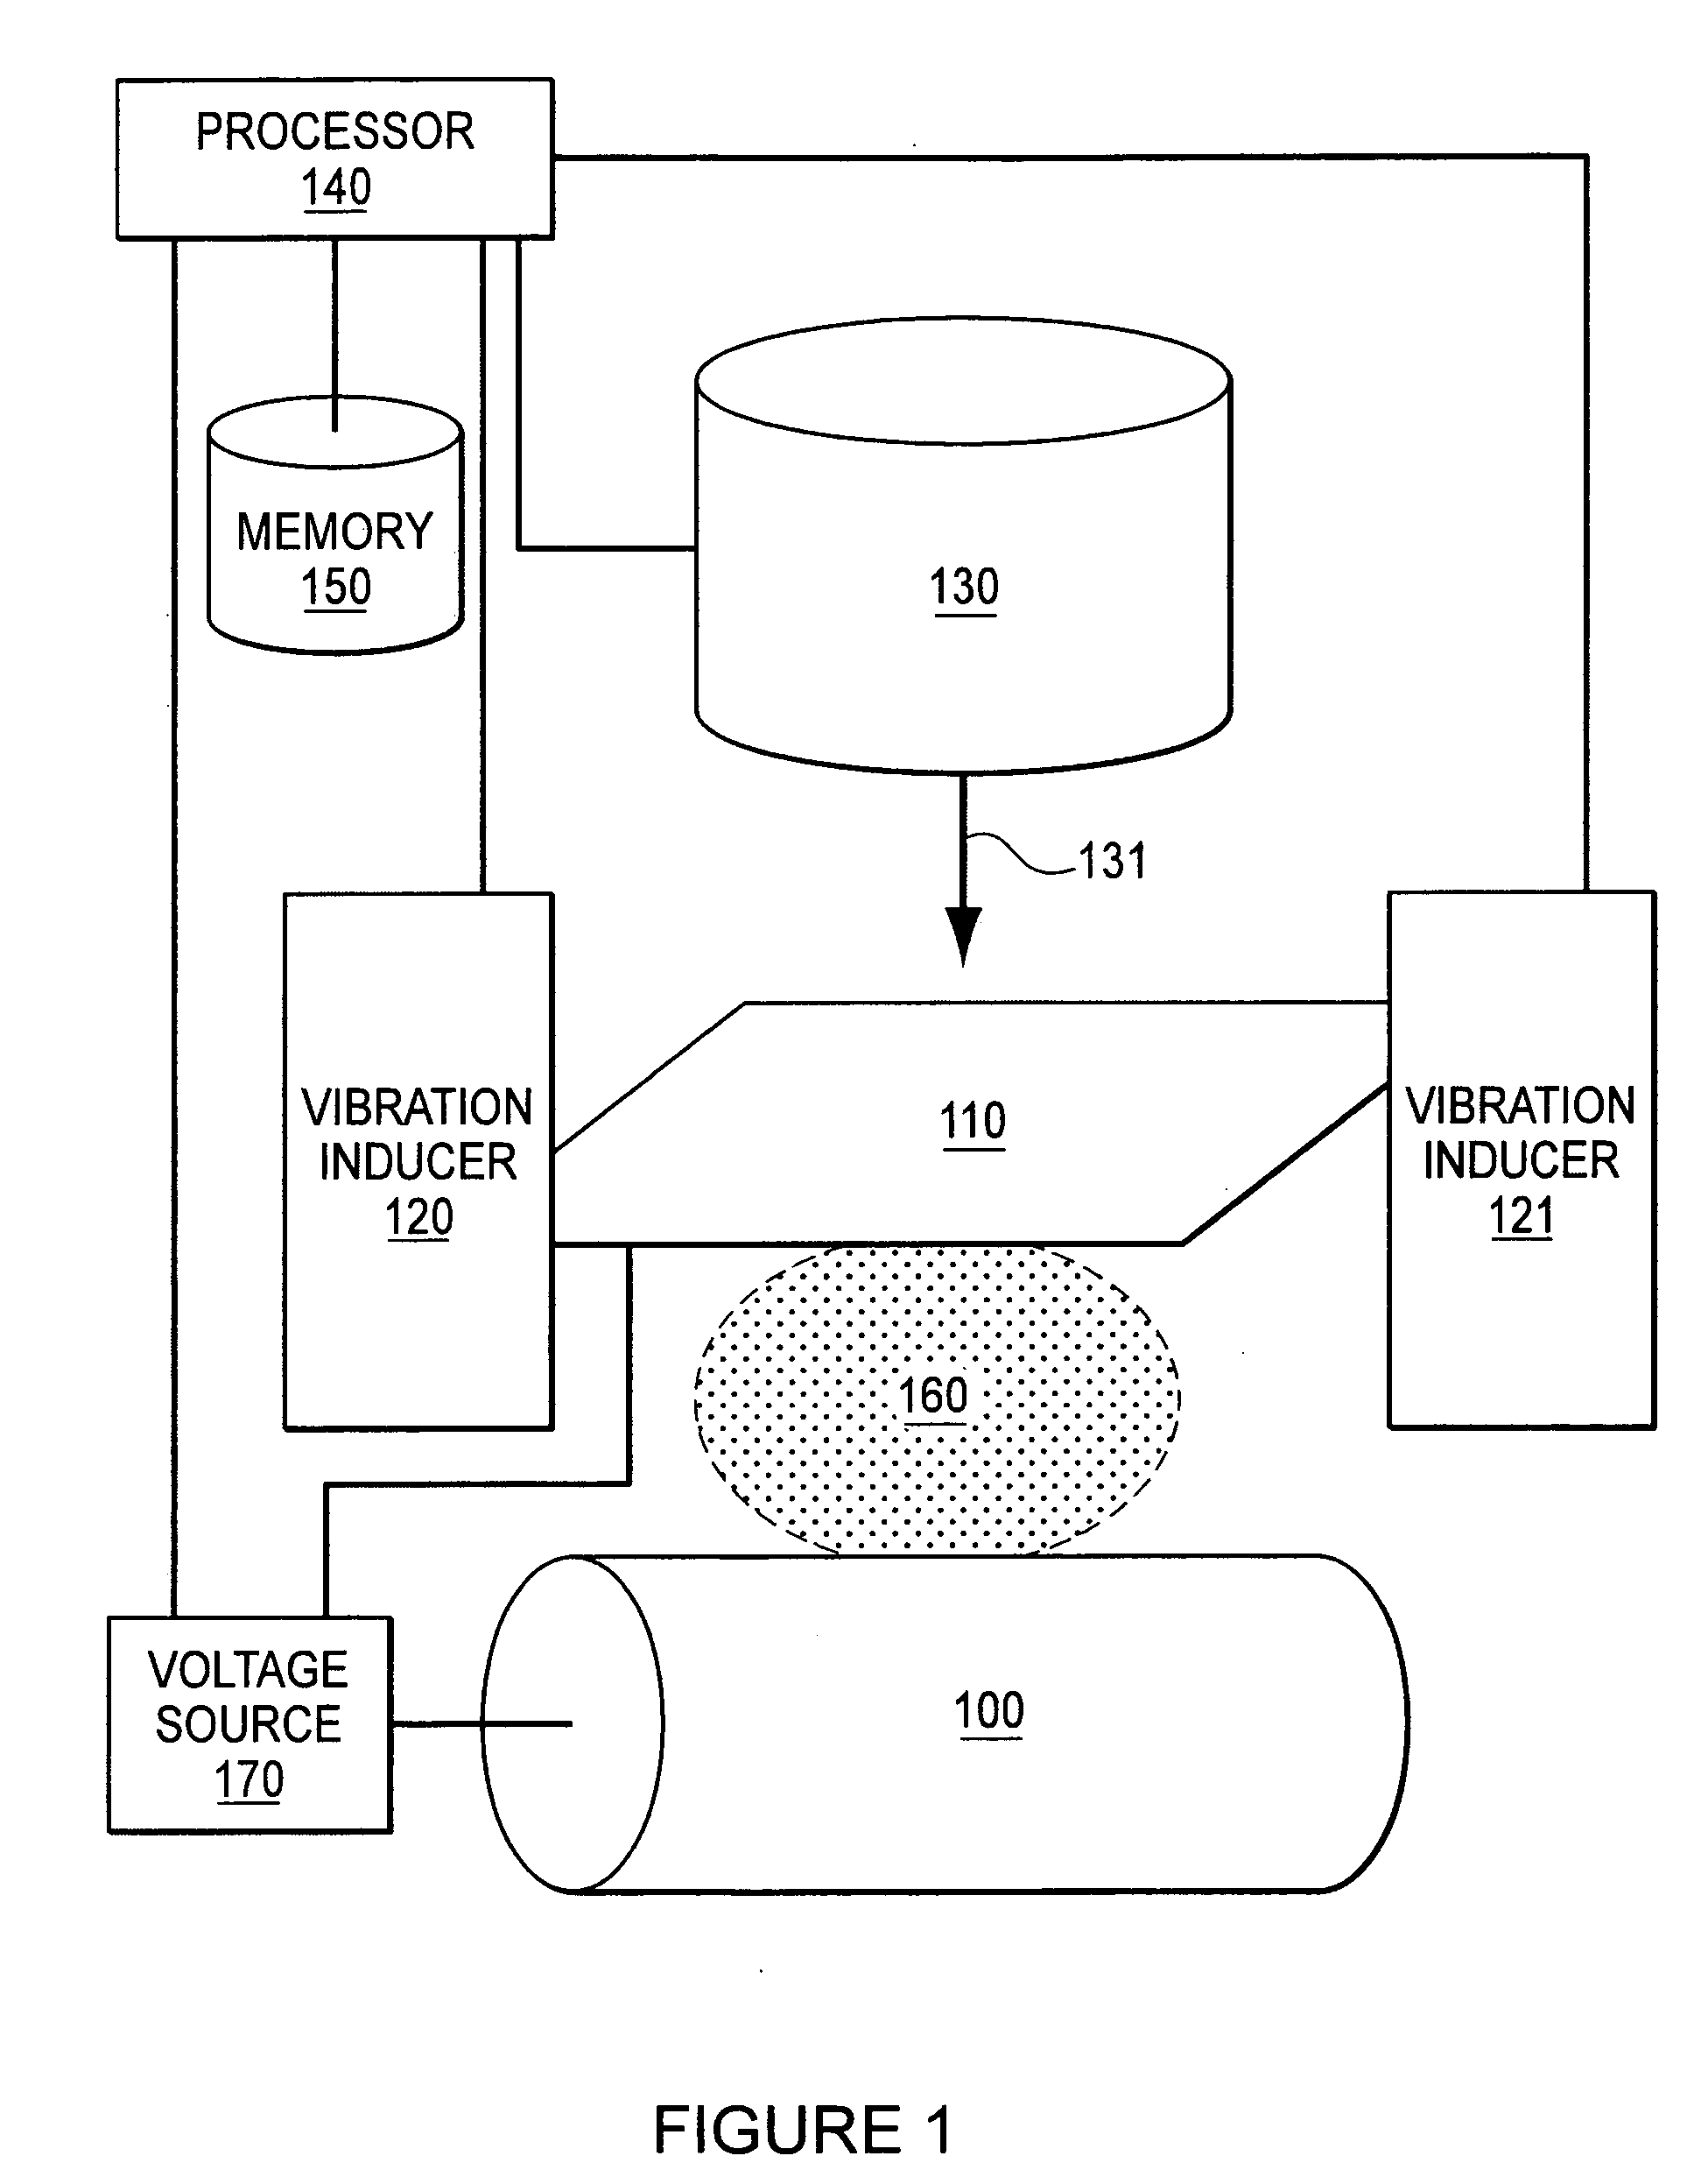 Method of producing particles utilizing a vibrating mesh nebulizer for coating a medical appliance, a system for producing particles, and a medical appliance